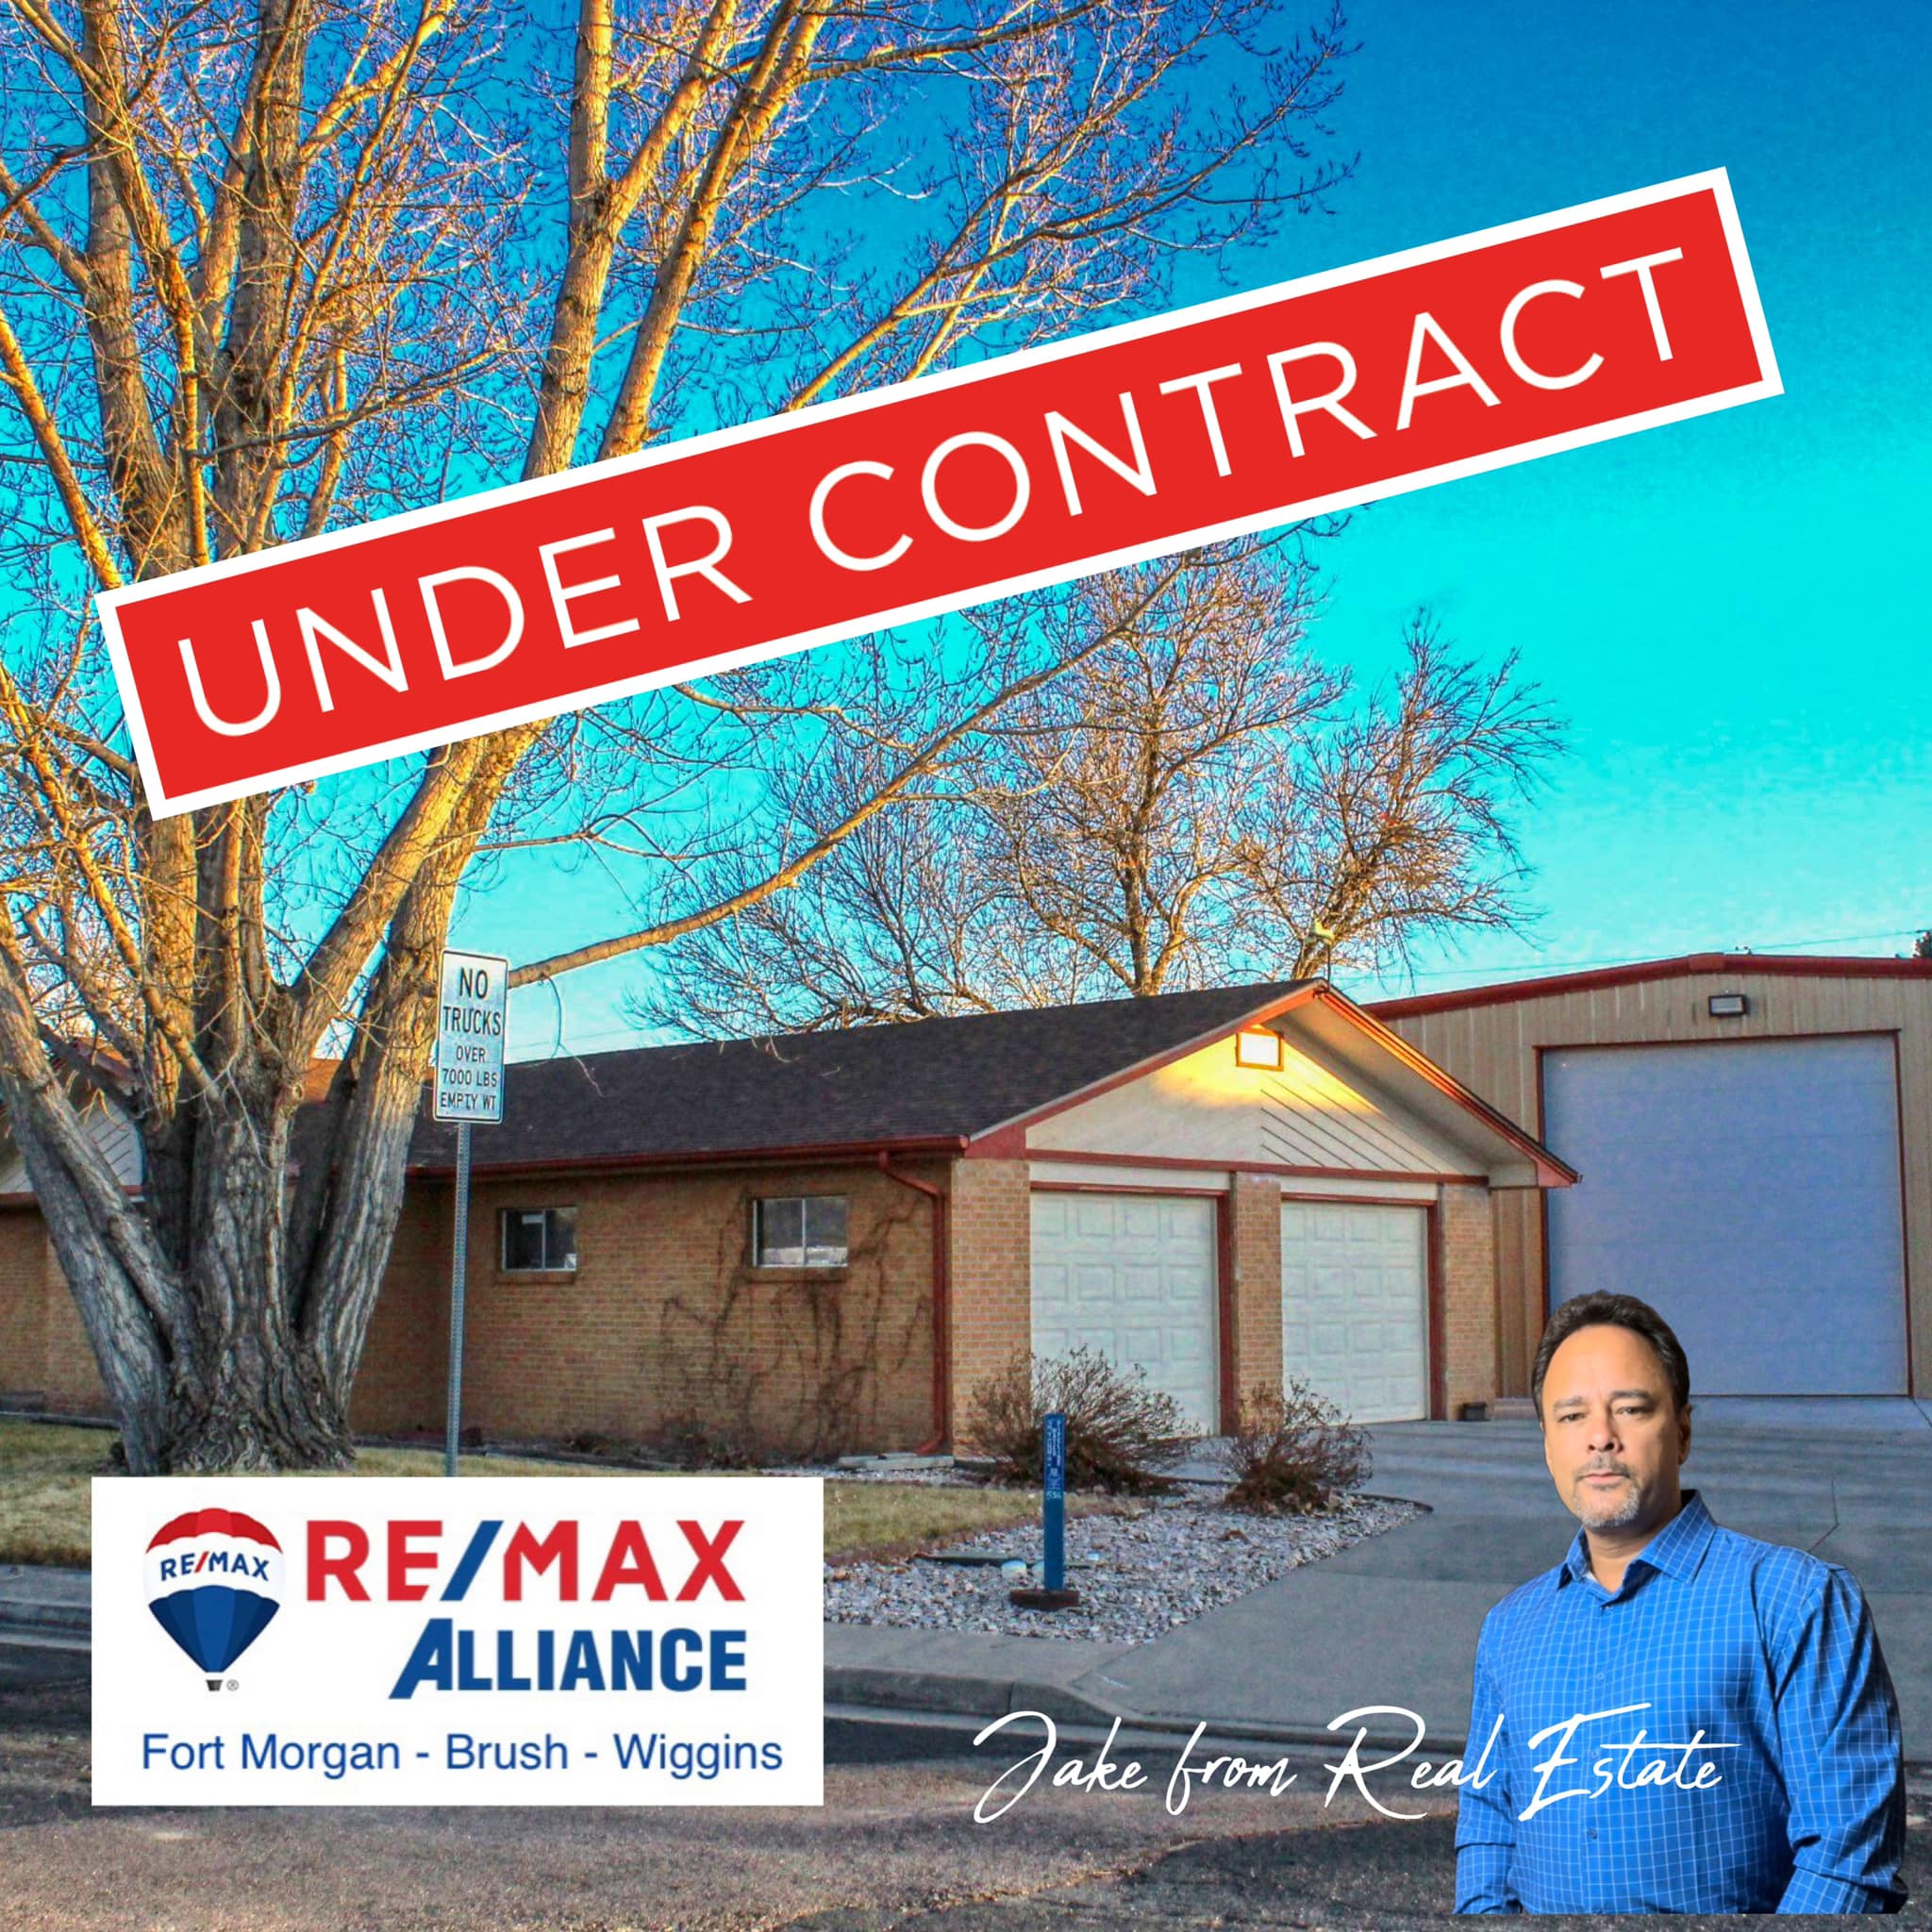 Jake from Real Estate - Remax Alliance Fort Morgan - Colorado 618 E Platte Ave, Fort Morgan Colorado 80701